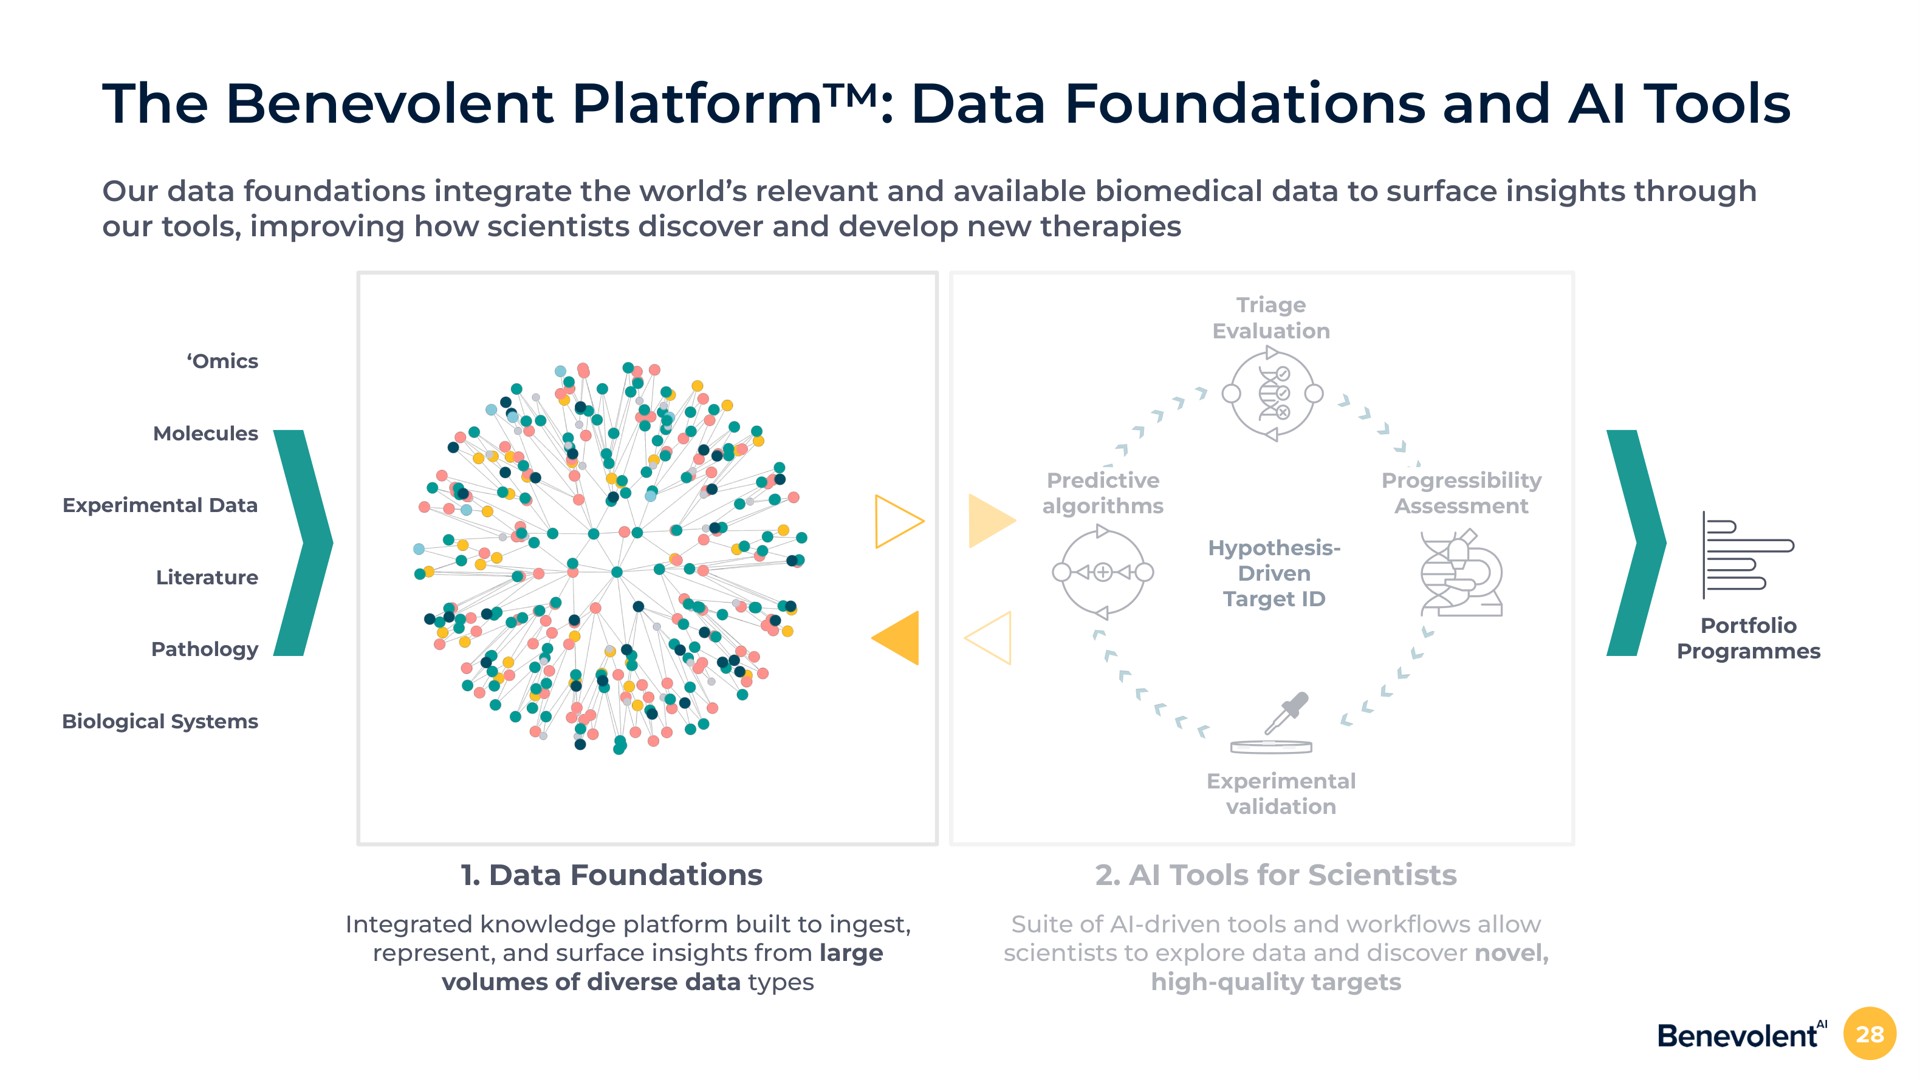 the benevolent platform data foundations and tools our data foundations integrate the world relevant and available data to surface insights through our tools improving how scientists discover and develop new therapies data foundations tools for scientists | BenevolentAI